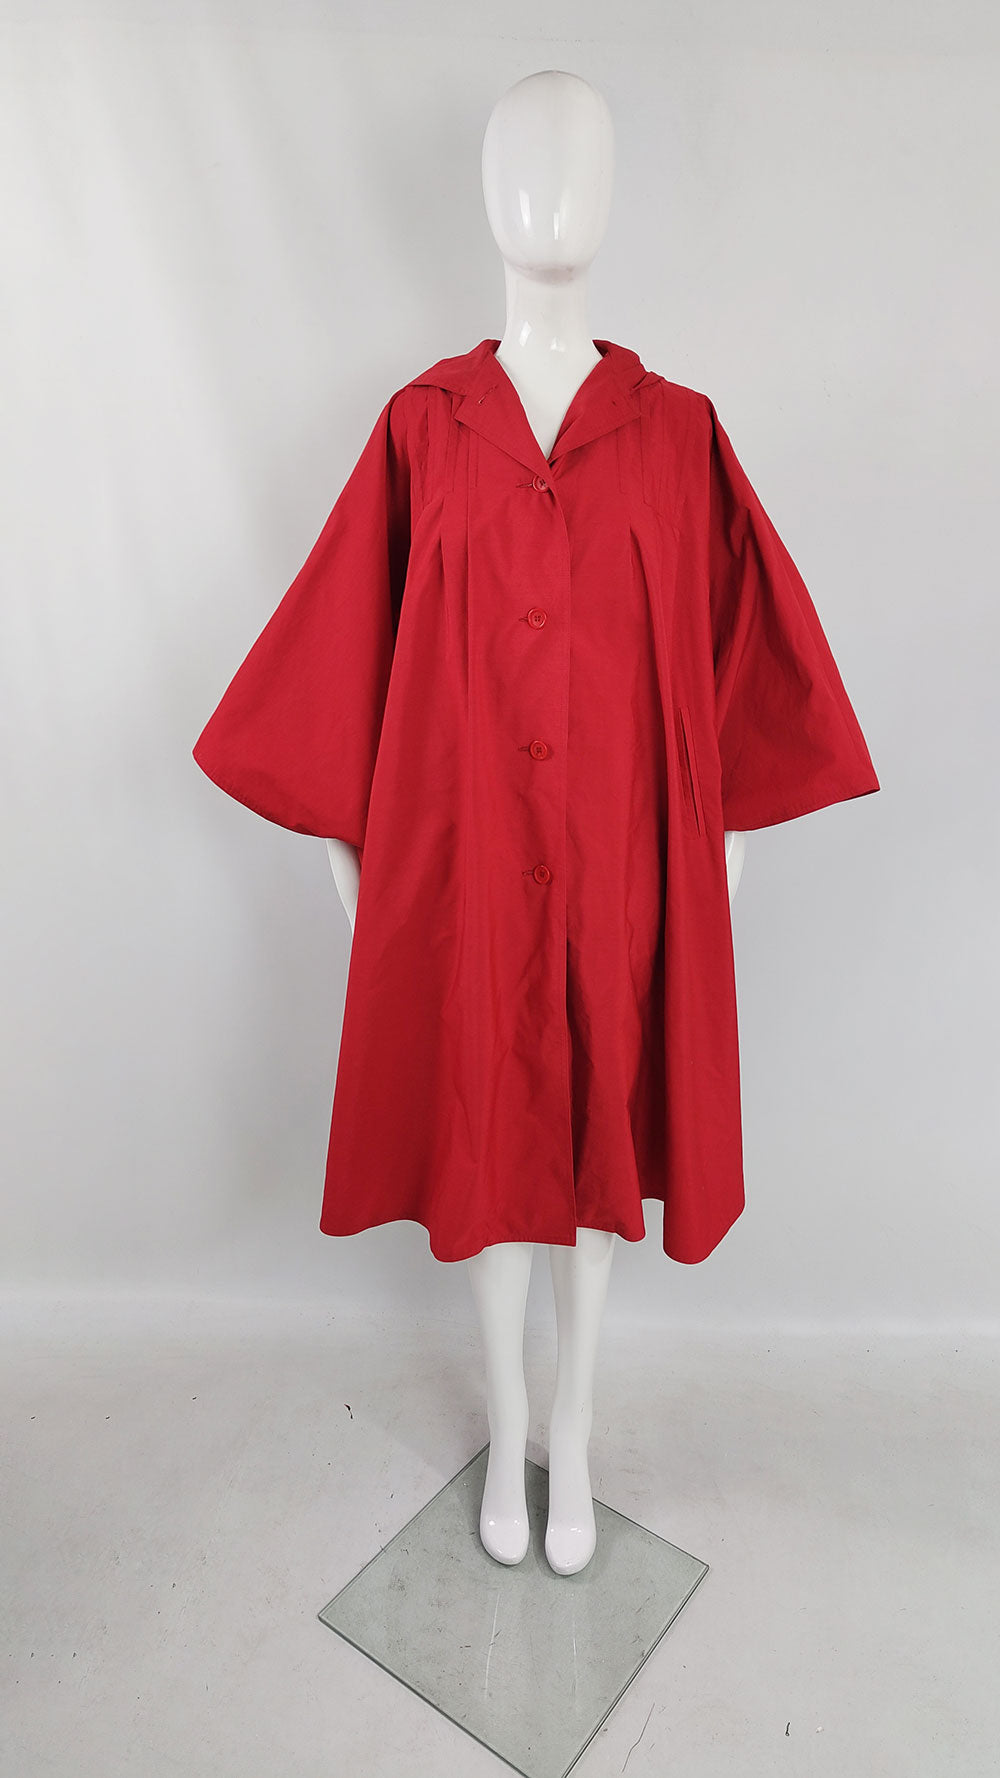 A 1970s vintage cape coat by Bill Haire for Neiman Marcus in a bright red with wide sleeves.